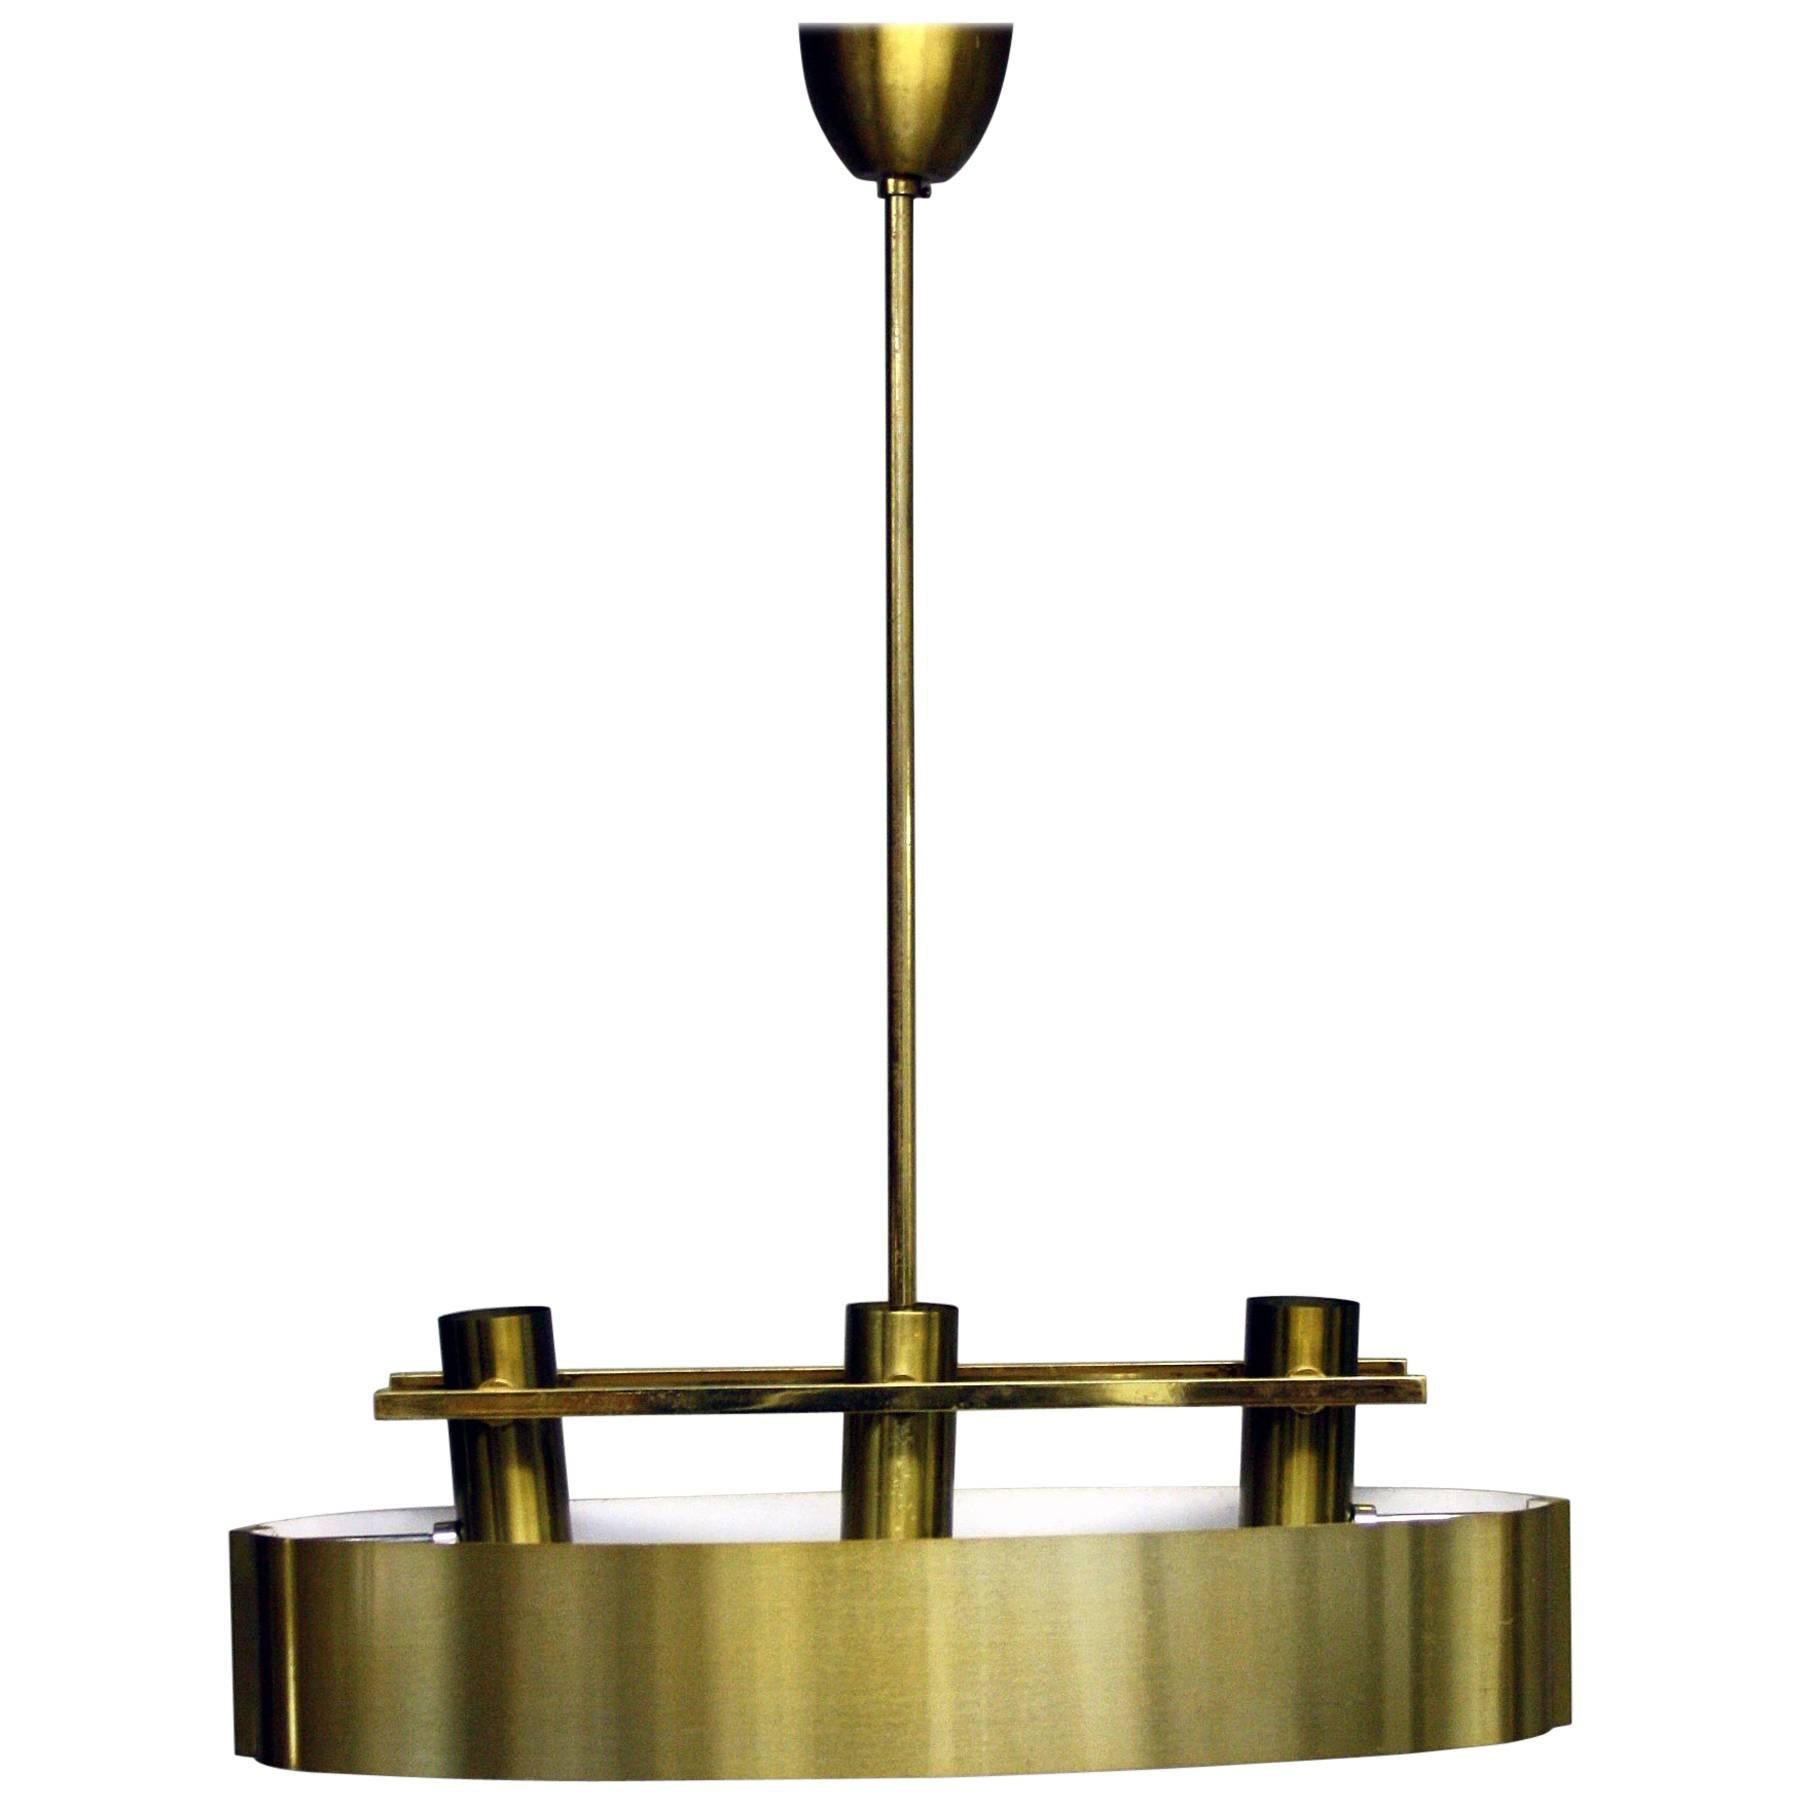 French 20th Century Brushed Brass Ceiling Light